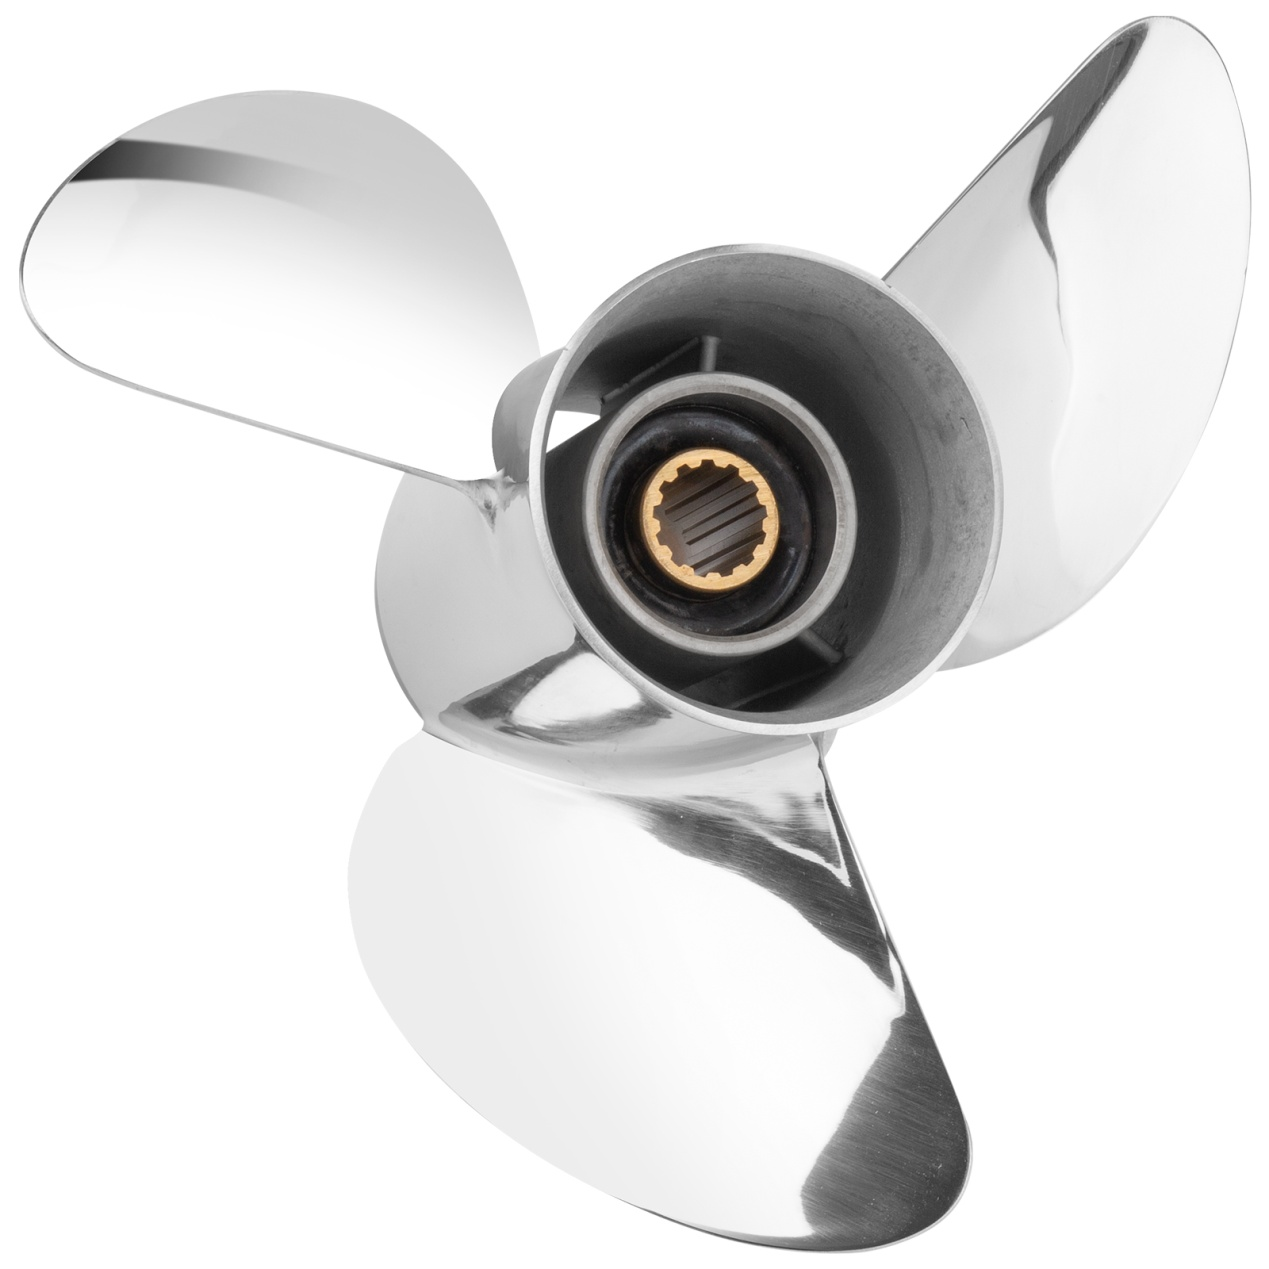 Qiclear's Stainless Steel Props for Mercury Come with 90 Days Warranty and Fast Delivery